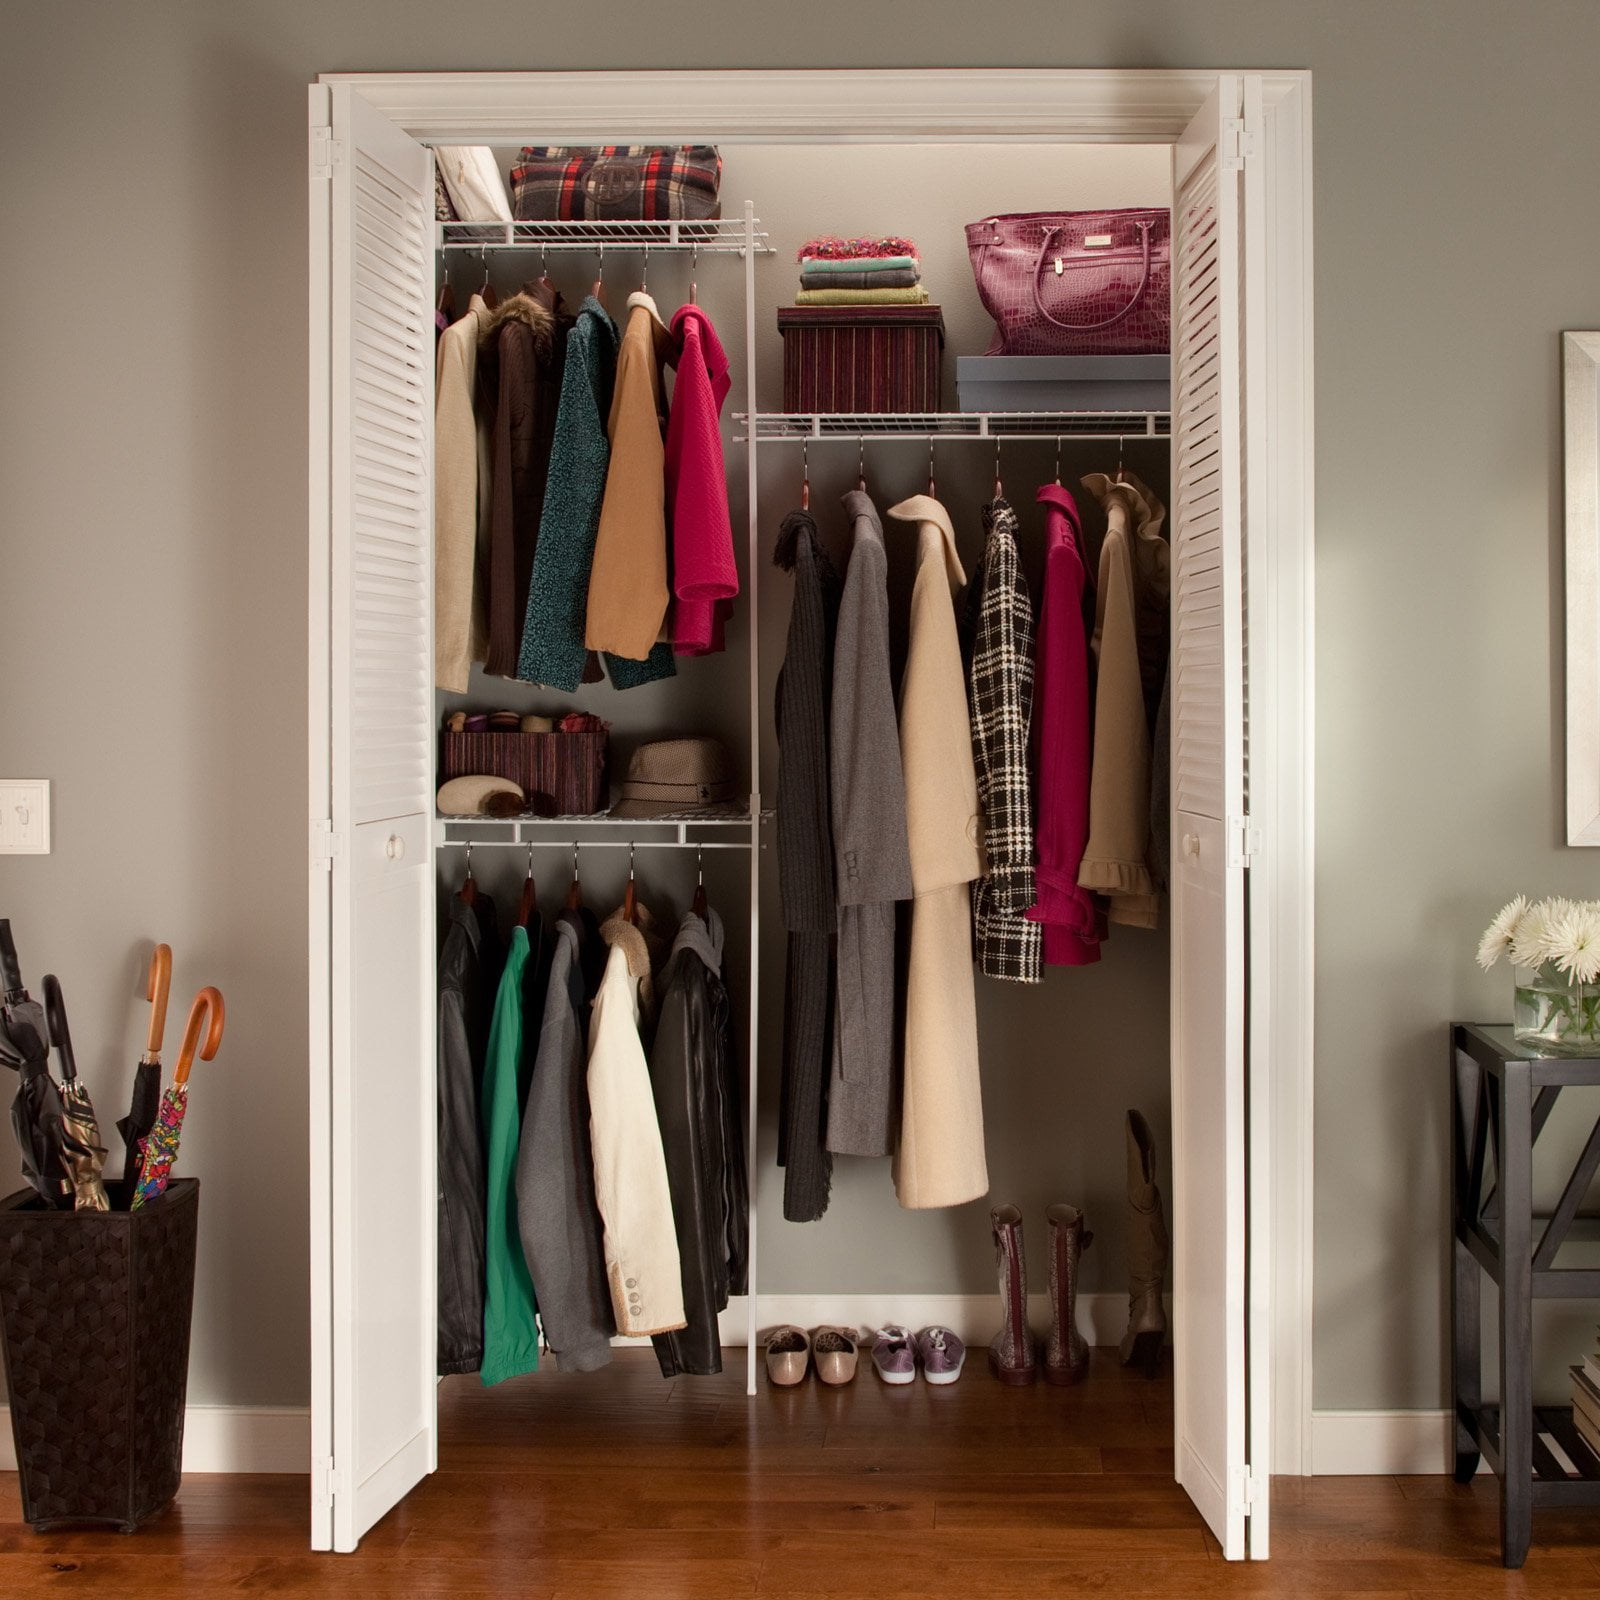 ClosetMaid Brightwood 5-ft to 10-ft W x 6.85-ft H Ash Wood Closet System